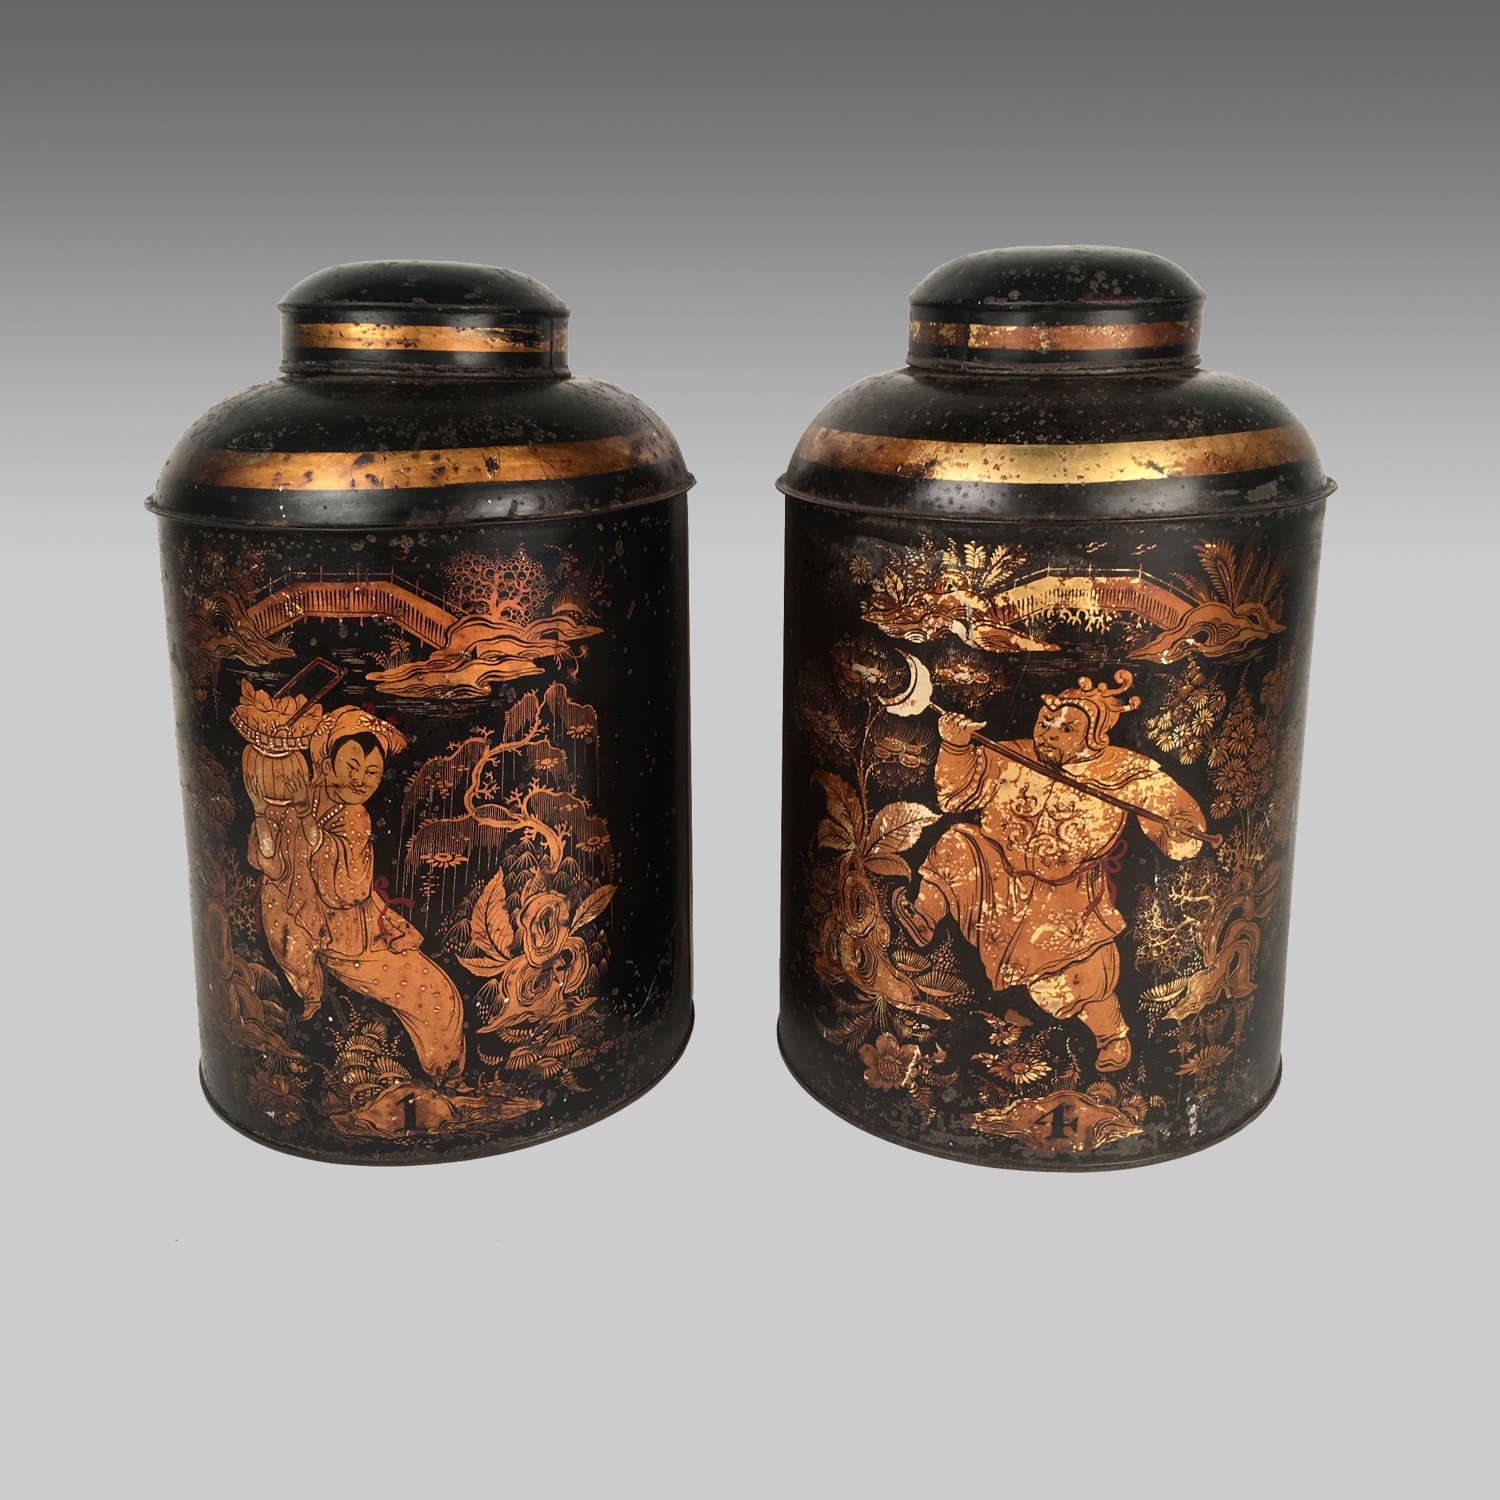 Pair of antique 19th century tea canisters